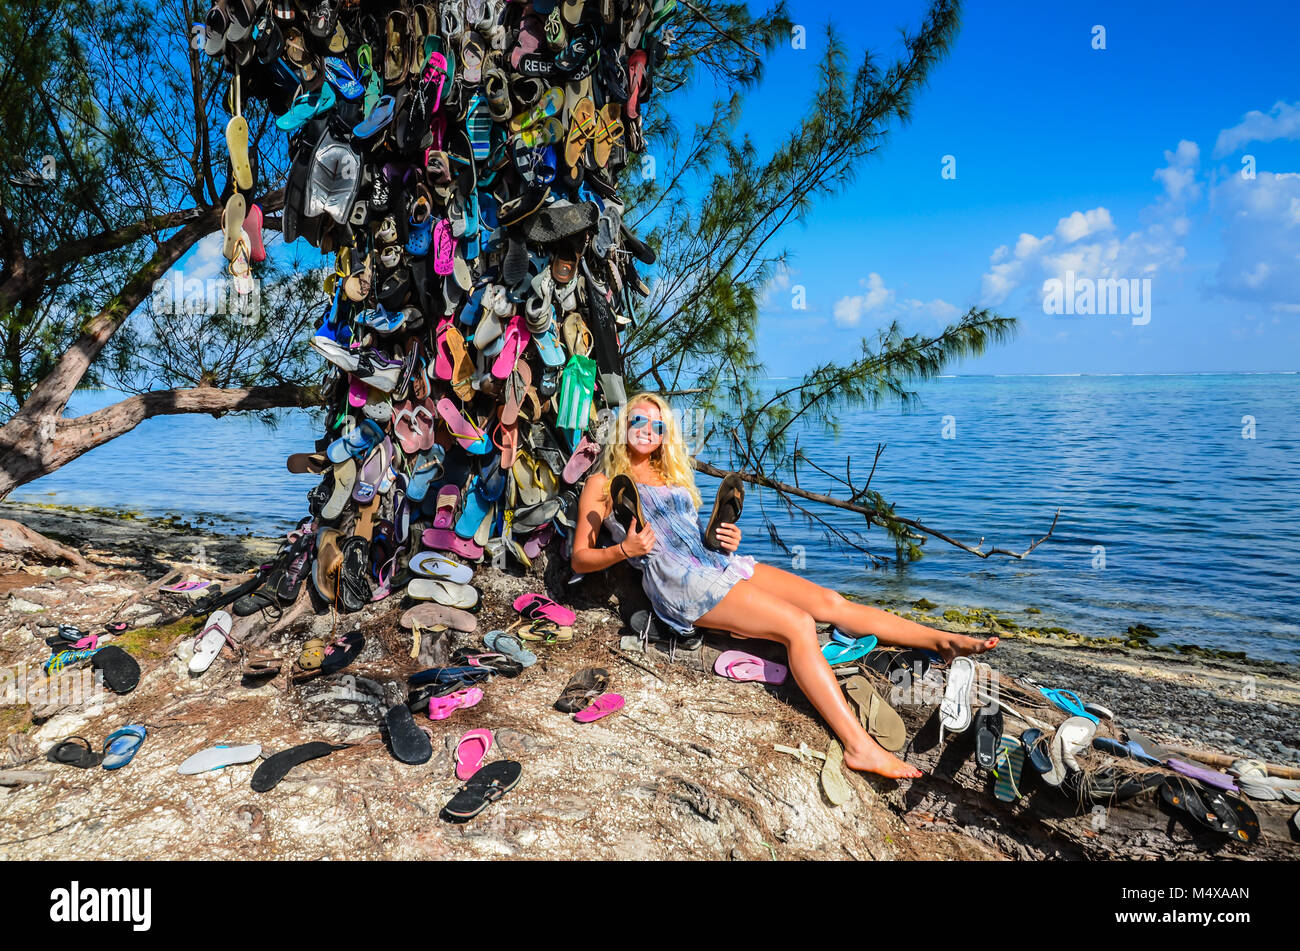 Sun-tanned blonde girl rests against a tree covered in flip flops left by tourists in Grand Cayman island in the Caribbean. Stock Photo